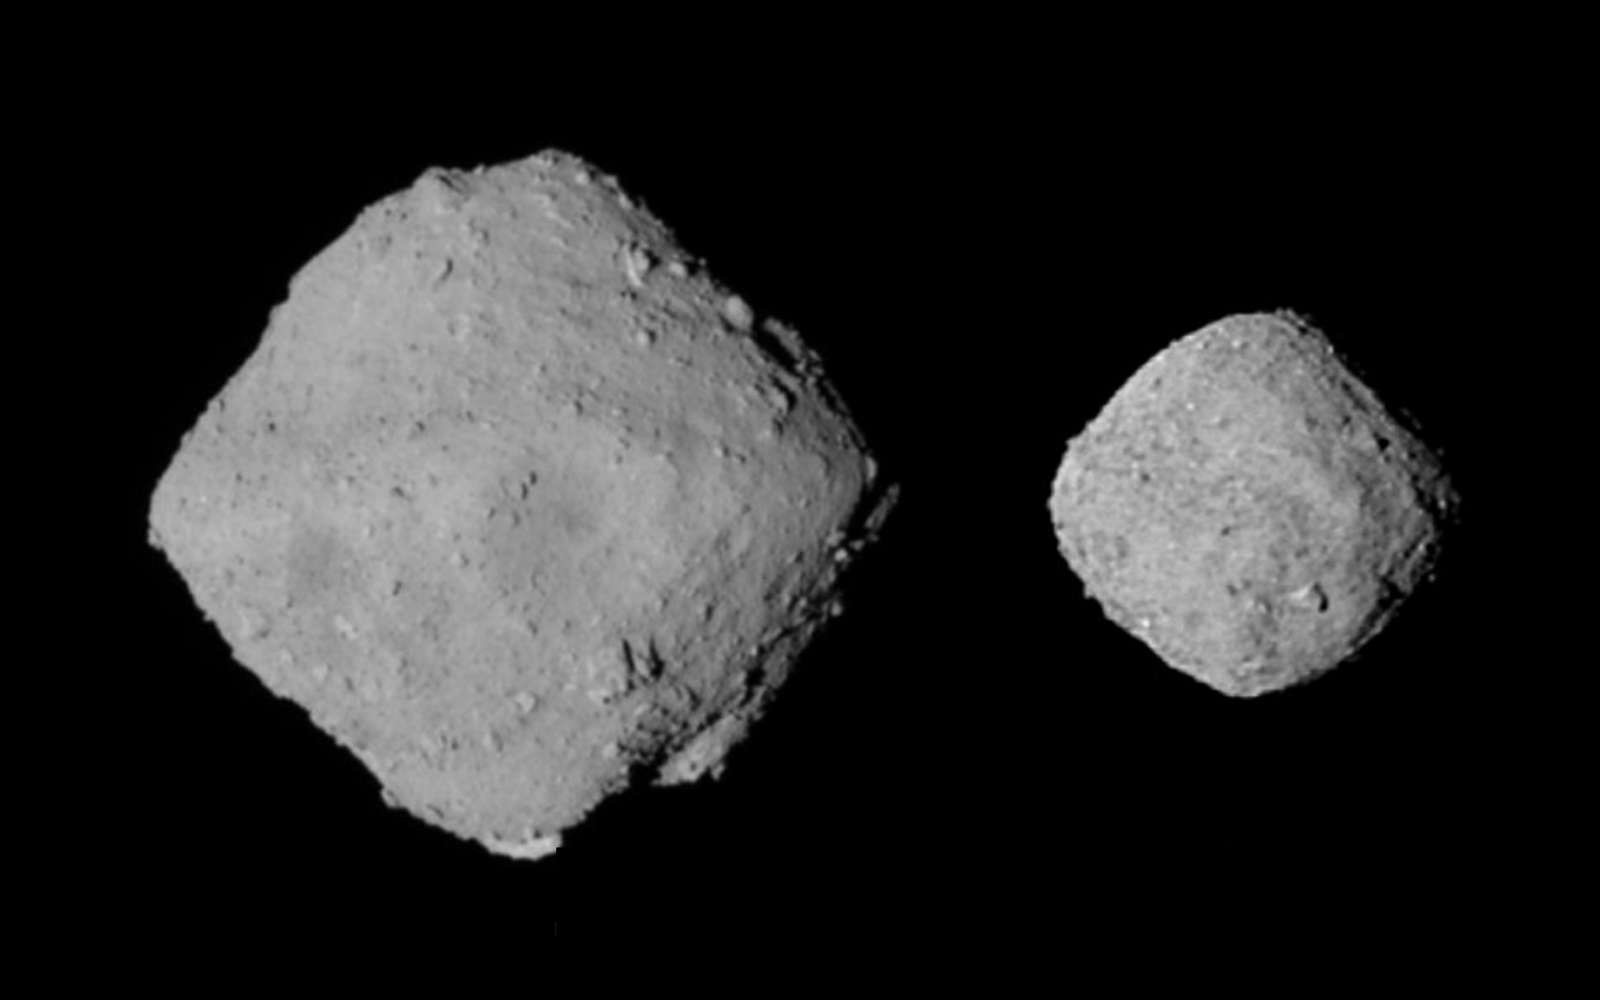 Image of Ryugu (left) by Japan’s Hayabusa2 spacecraft and of Bennu (right) by NASA’s OSIRIS-REx probe